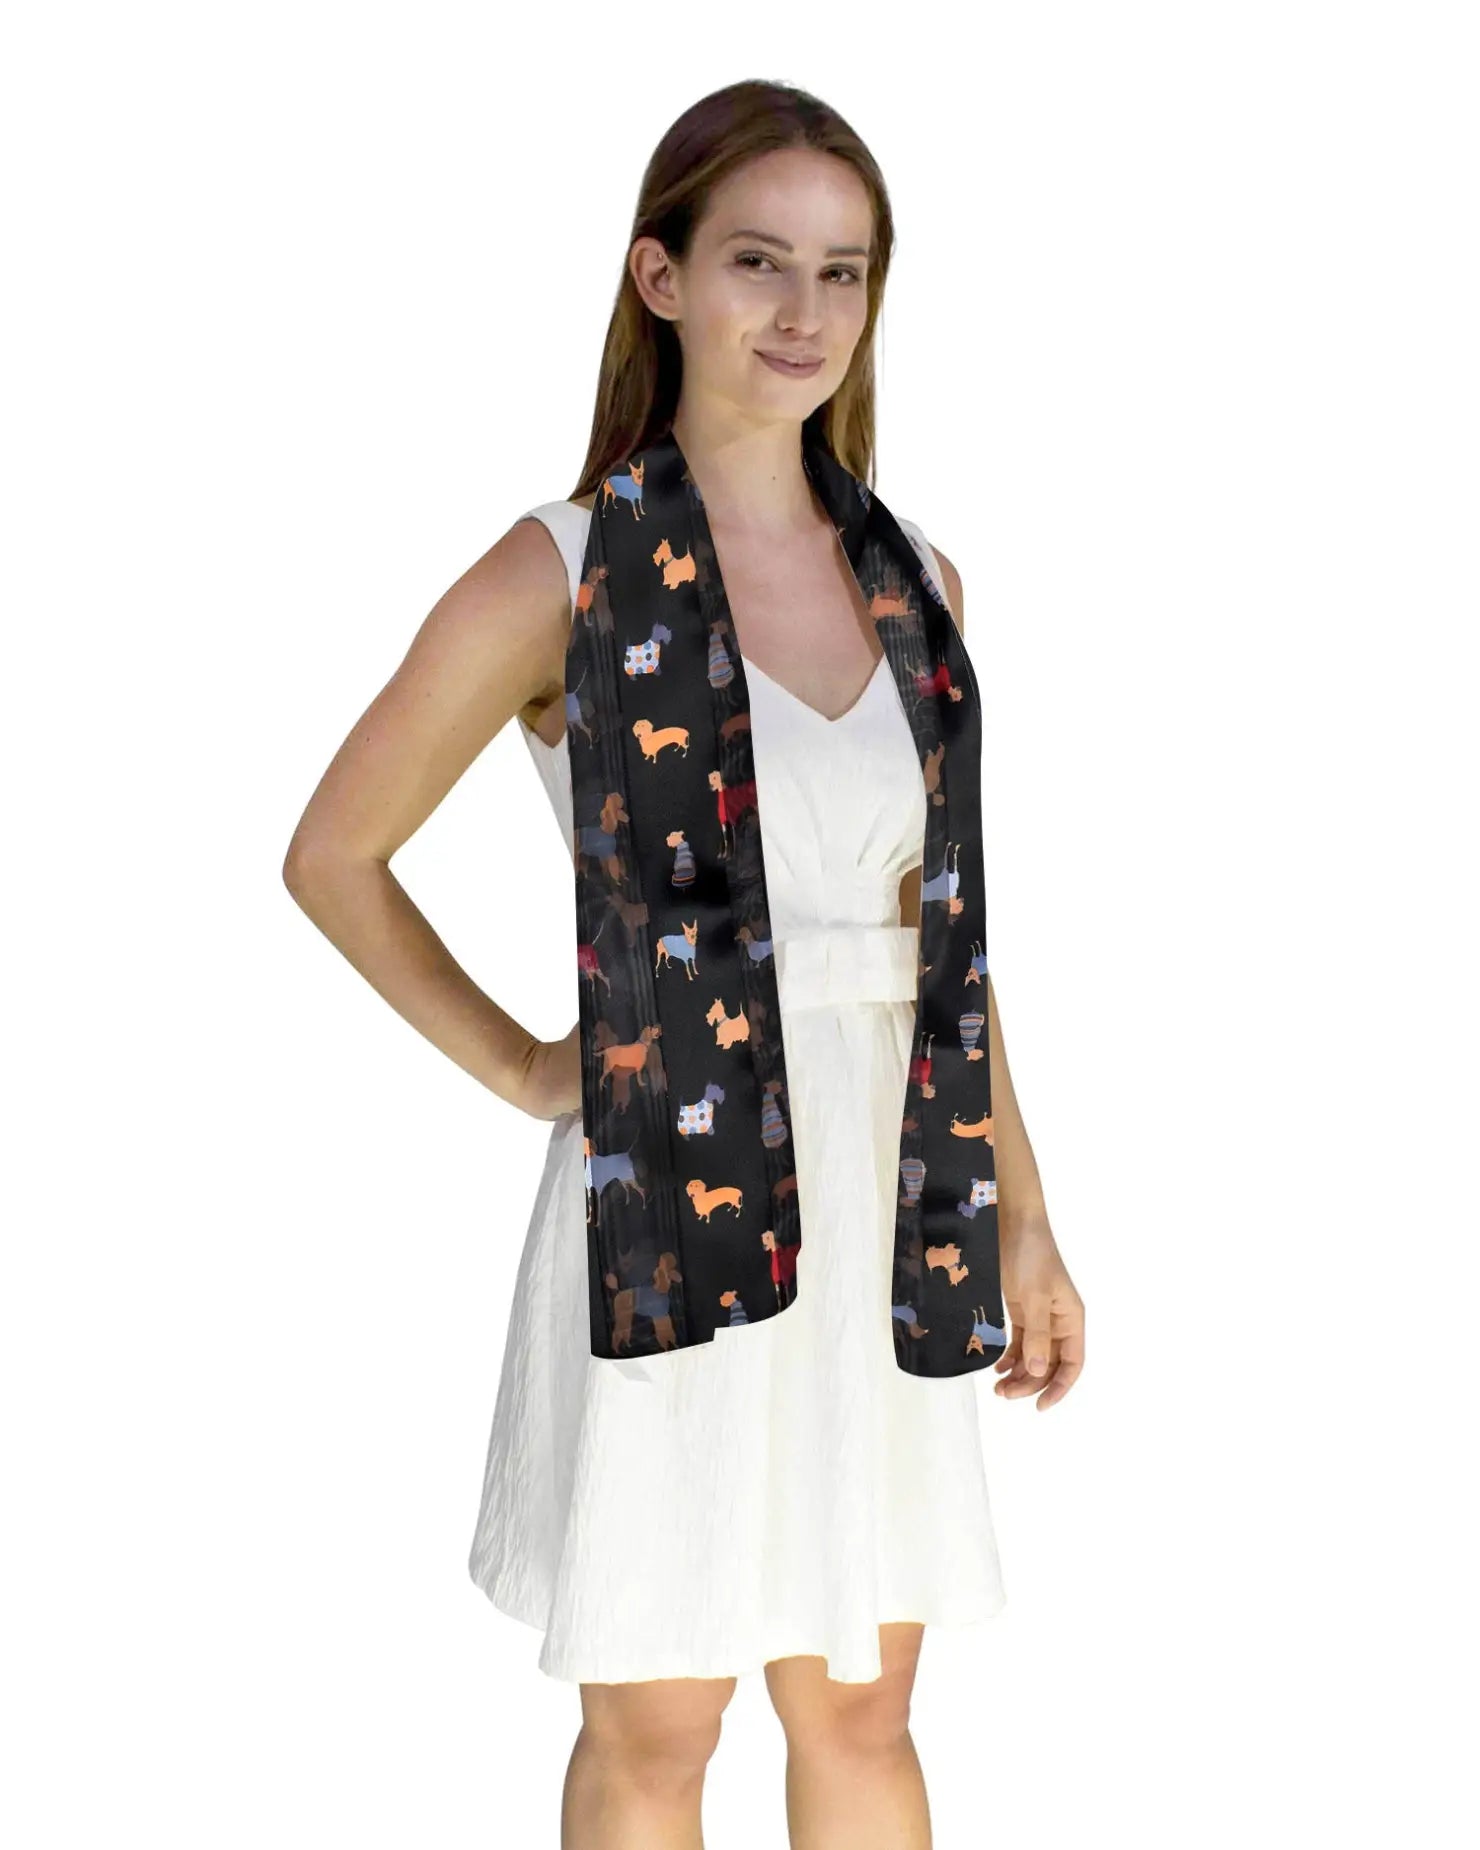 Stylish woman wearing a black vest with colorful dogs on it, featuring the Satin Stripe Dog Print Silky Soft Scarf.